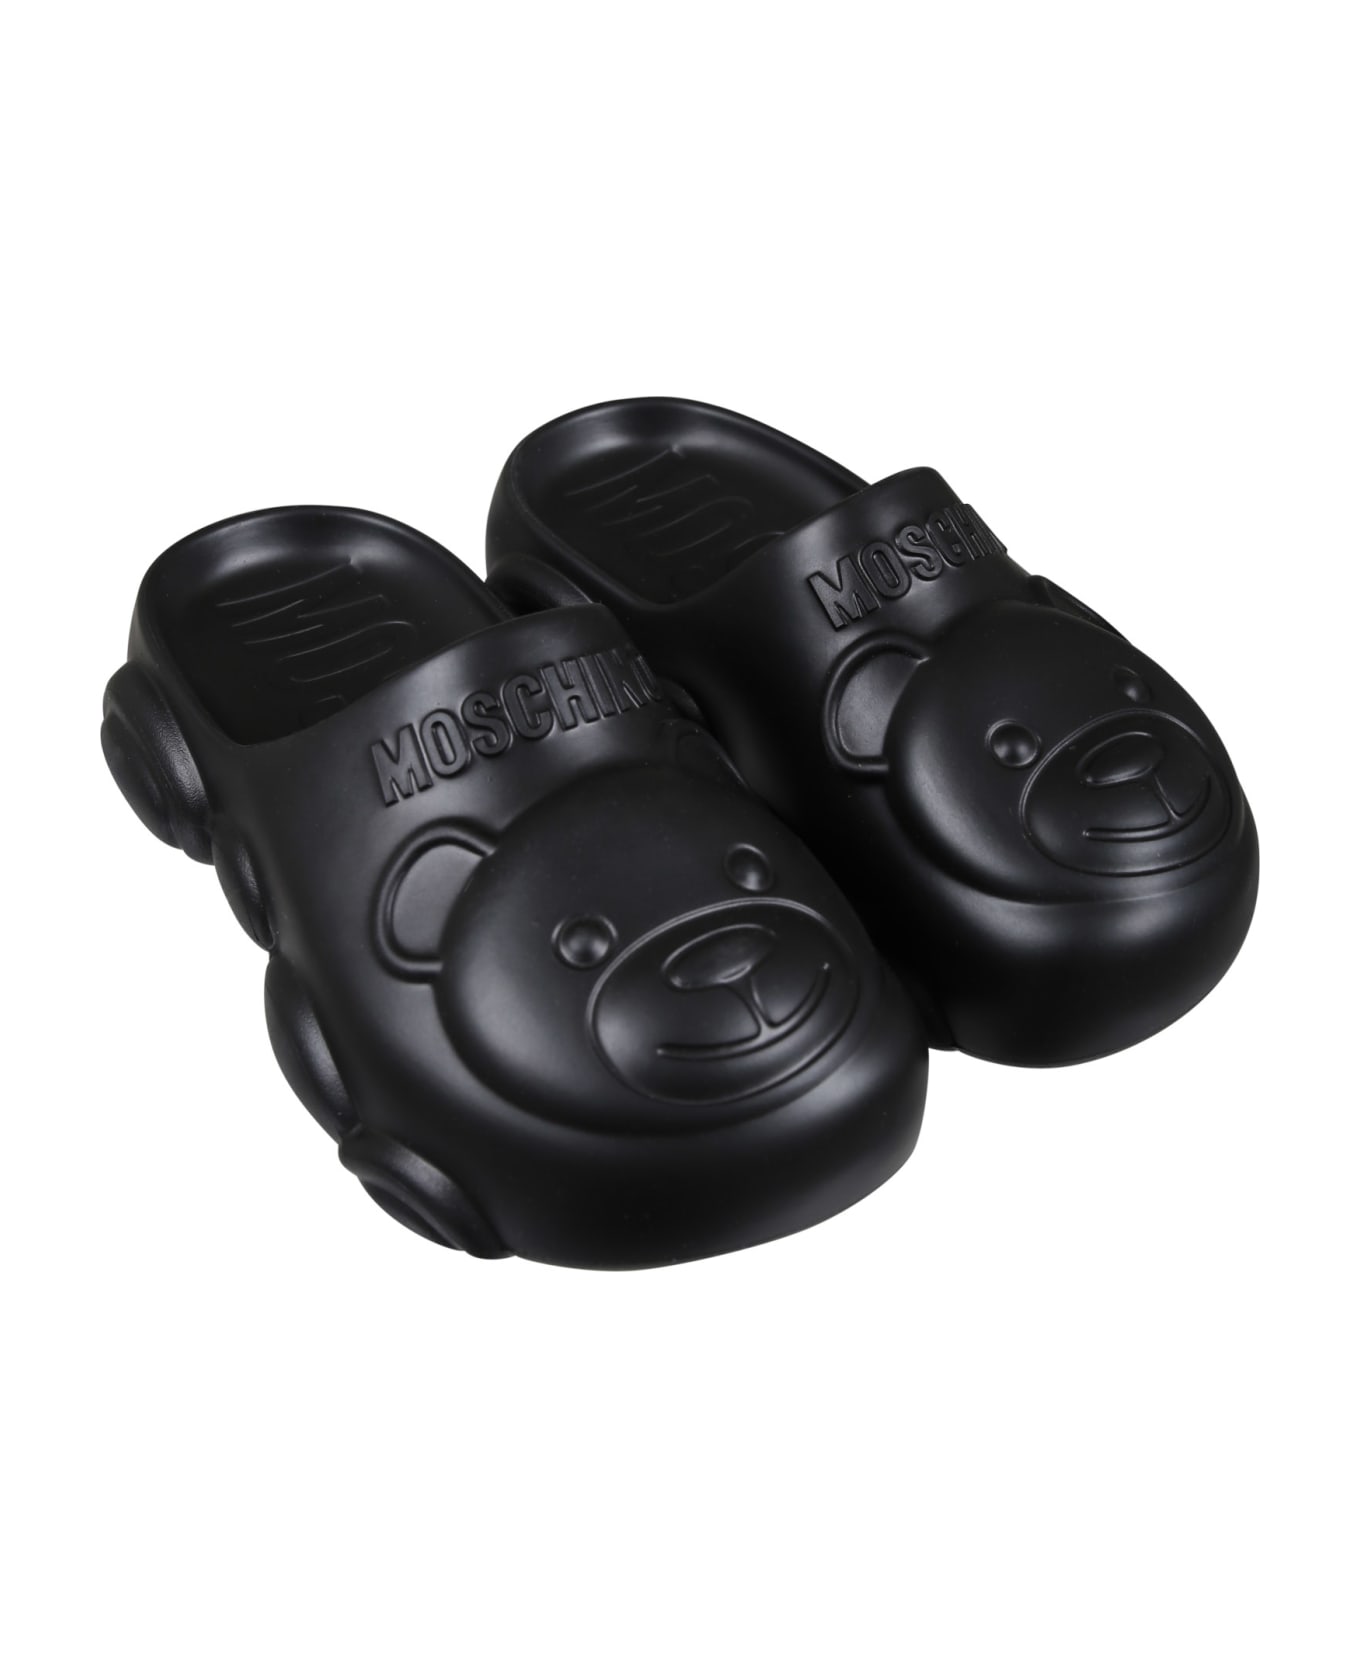 Moschino Black Mules For Kids With Teddy Bear - Black シューズ